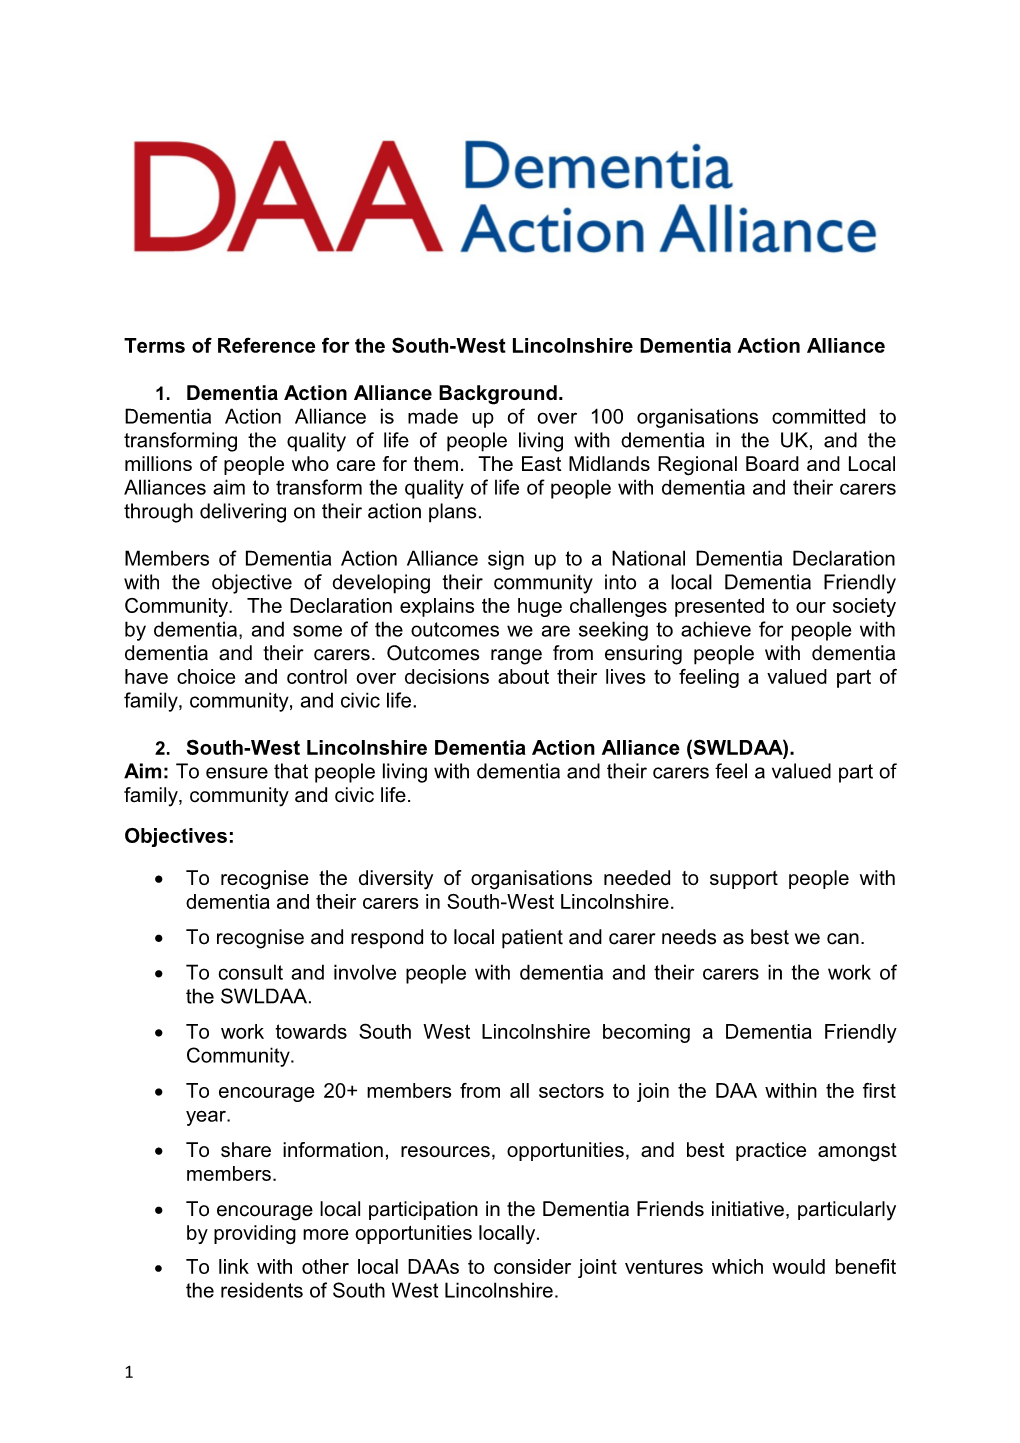 Terms of Reference for the South-West Lincolnshire Dementia Action Alliance